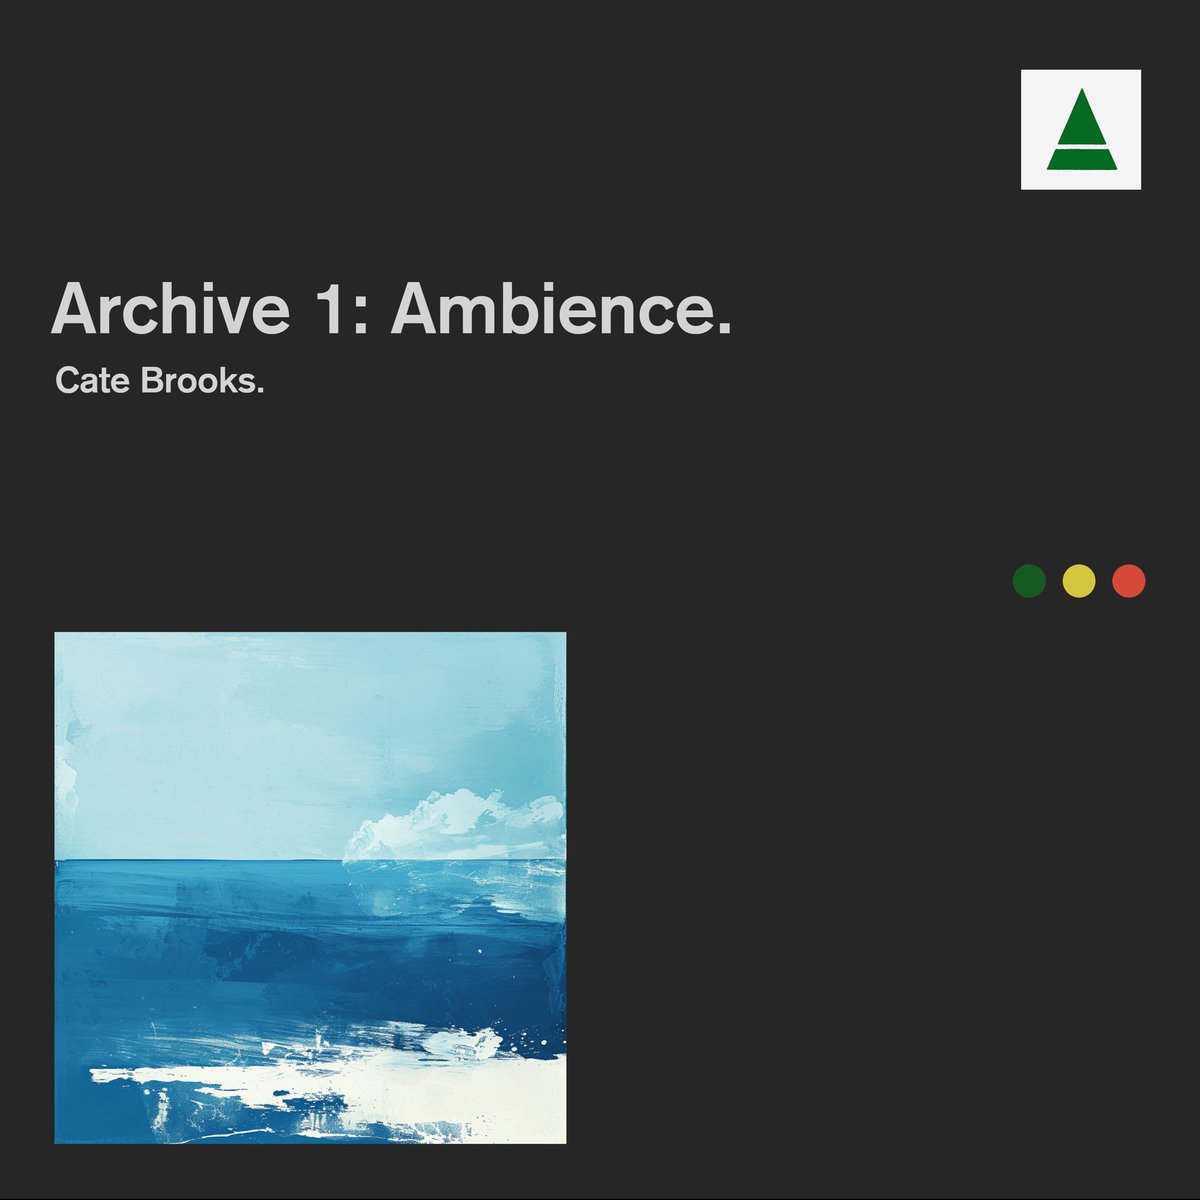 Archive 1 is available now! Really hope you all enjoy it. It’s Bandcamp Friday also- if you pick up a copy today, you’ll be helping to support independent art even more. Thank you. cafekaput.Bandcamp.com 🌲✨